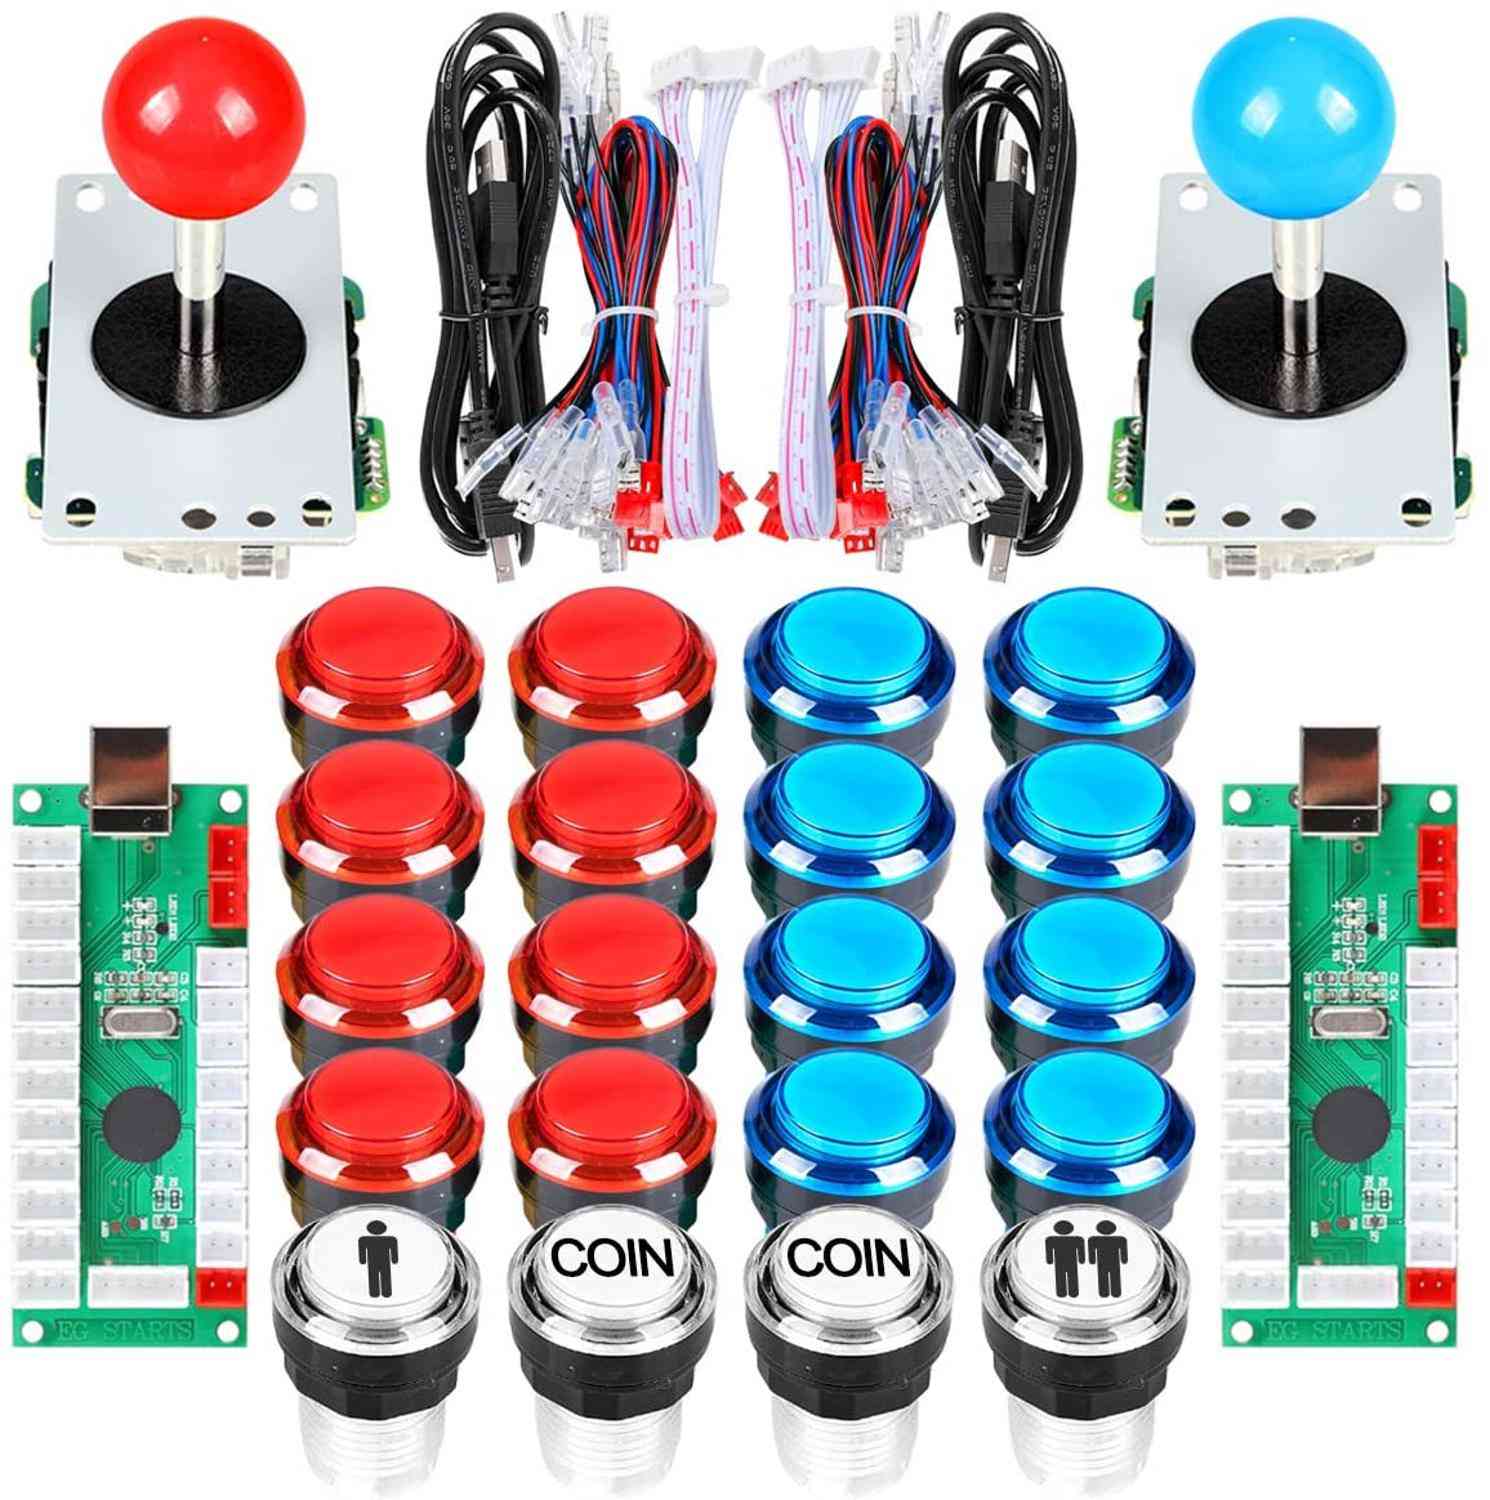 Led Illuminated Push Buttons + 2 Player + Coin For Raspberry